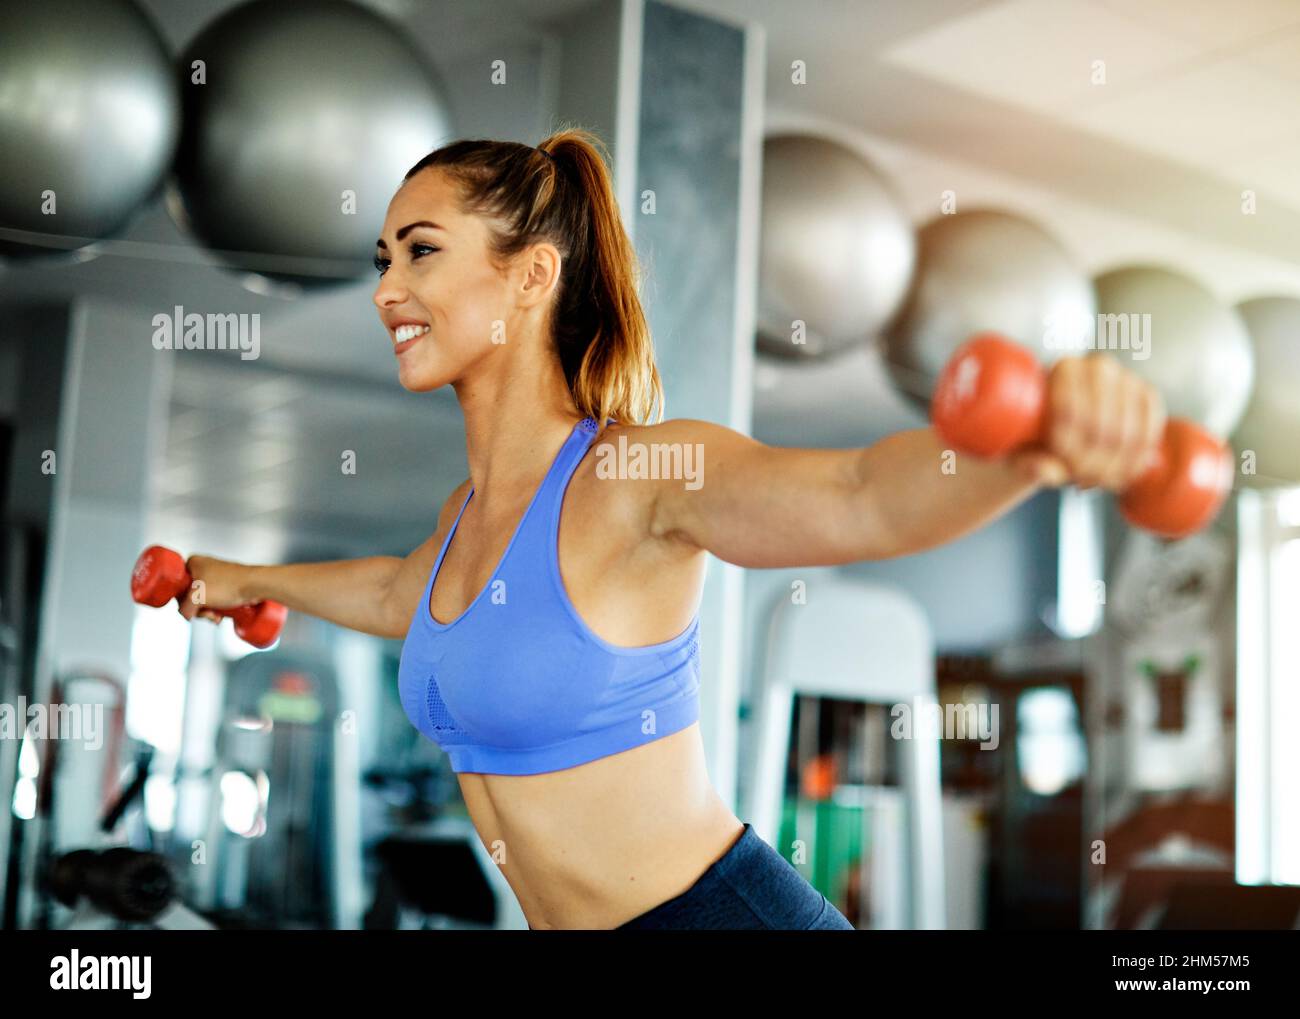 gym sport fitness exercise lifestyle athlete health training weight body healthy workout Stock Photo